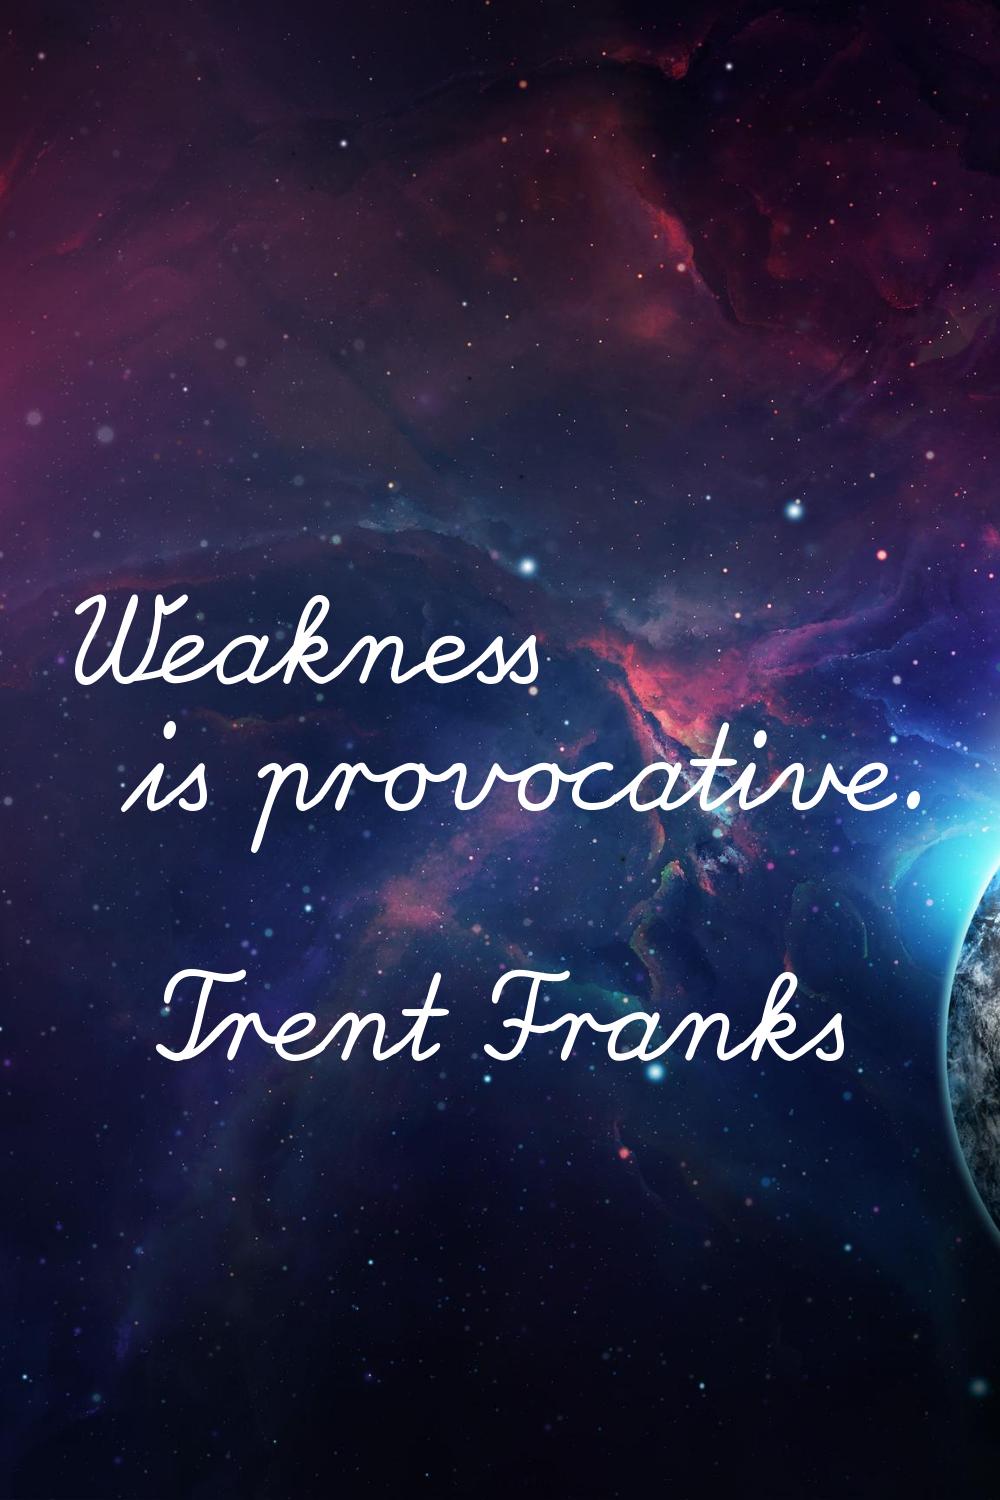 Weakness is provocative.